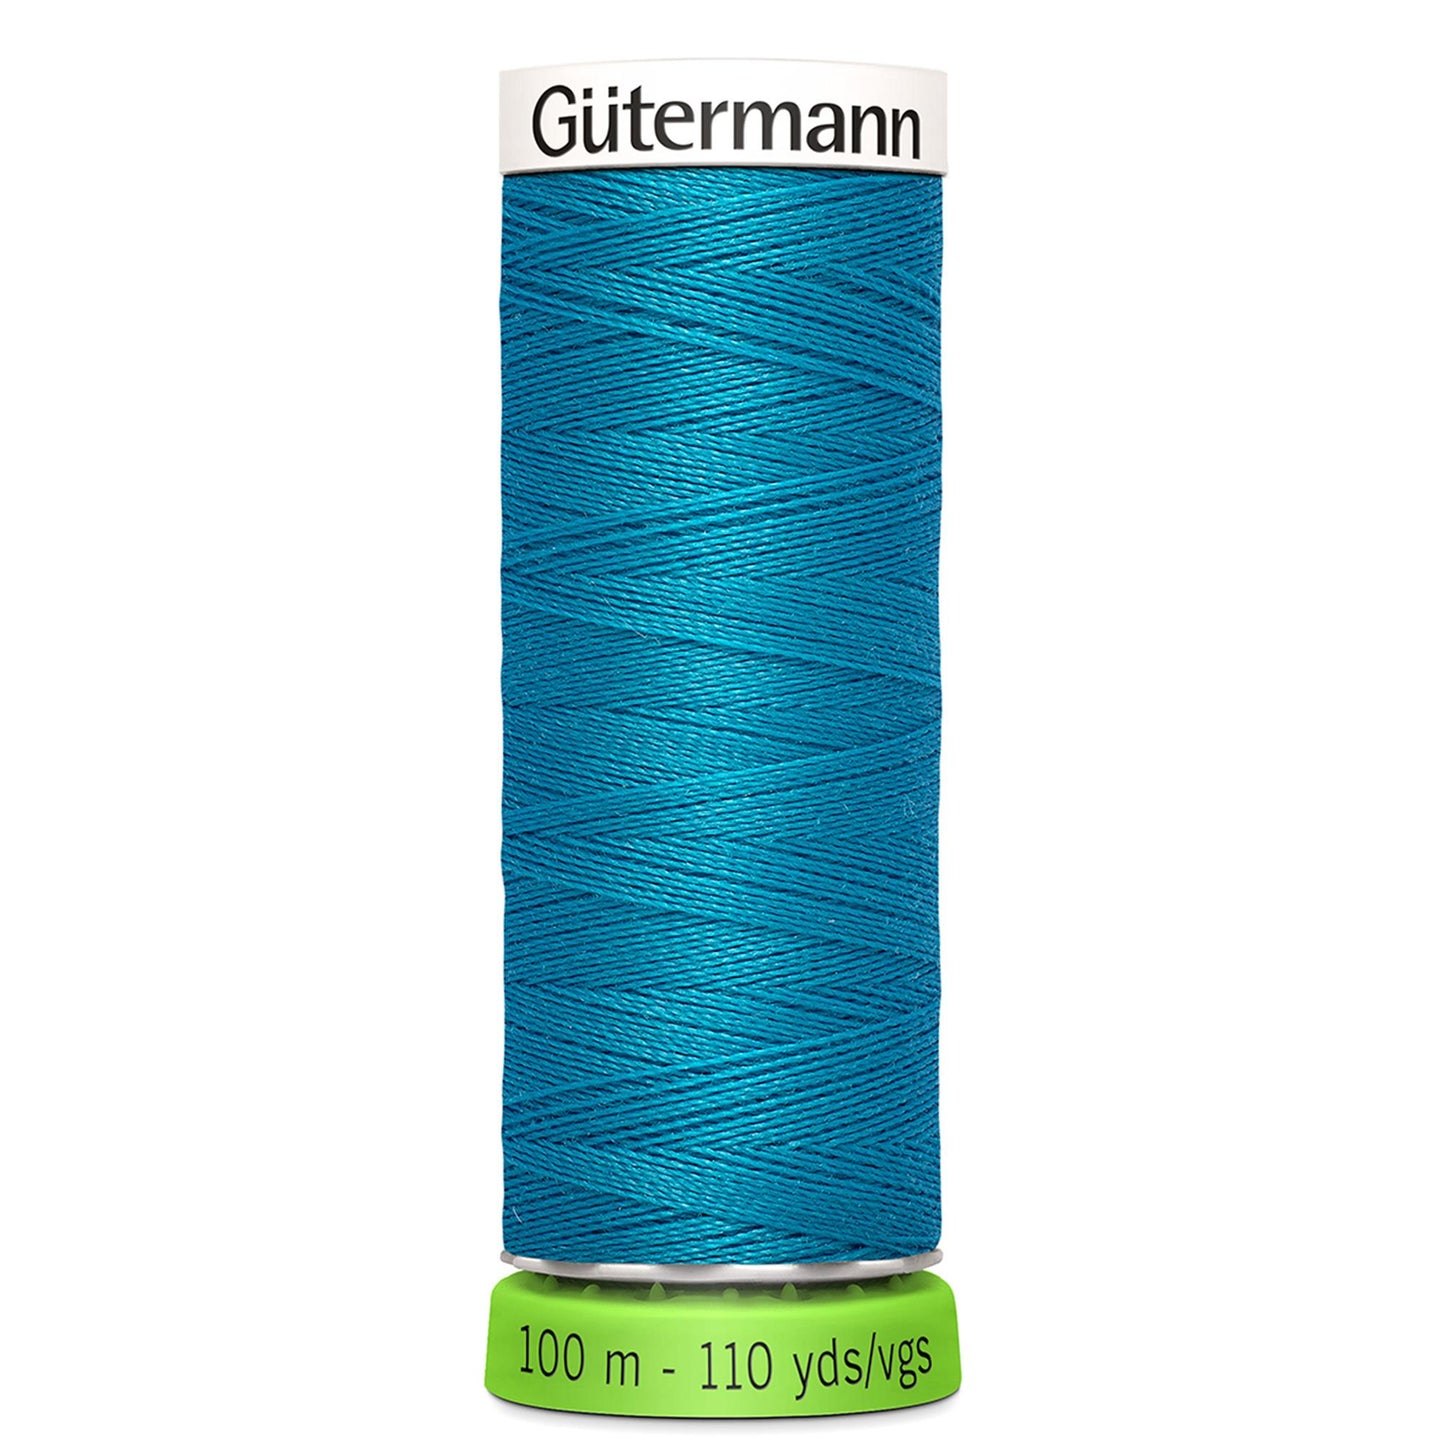 Gütermann rPet (100% Recycled) Sew-All Thread 100m - Col. 761 - River Blue